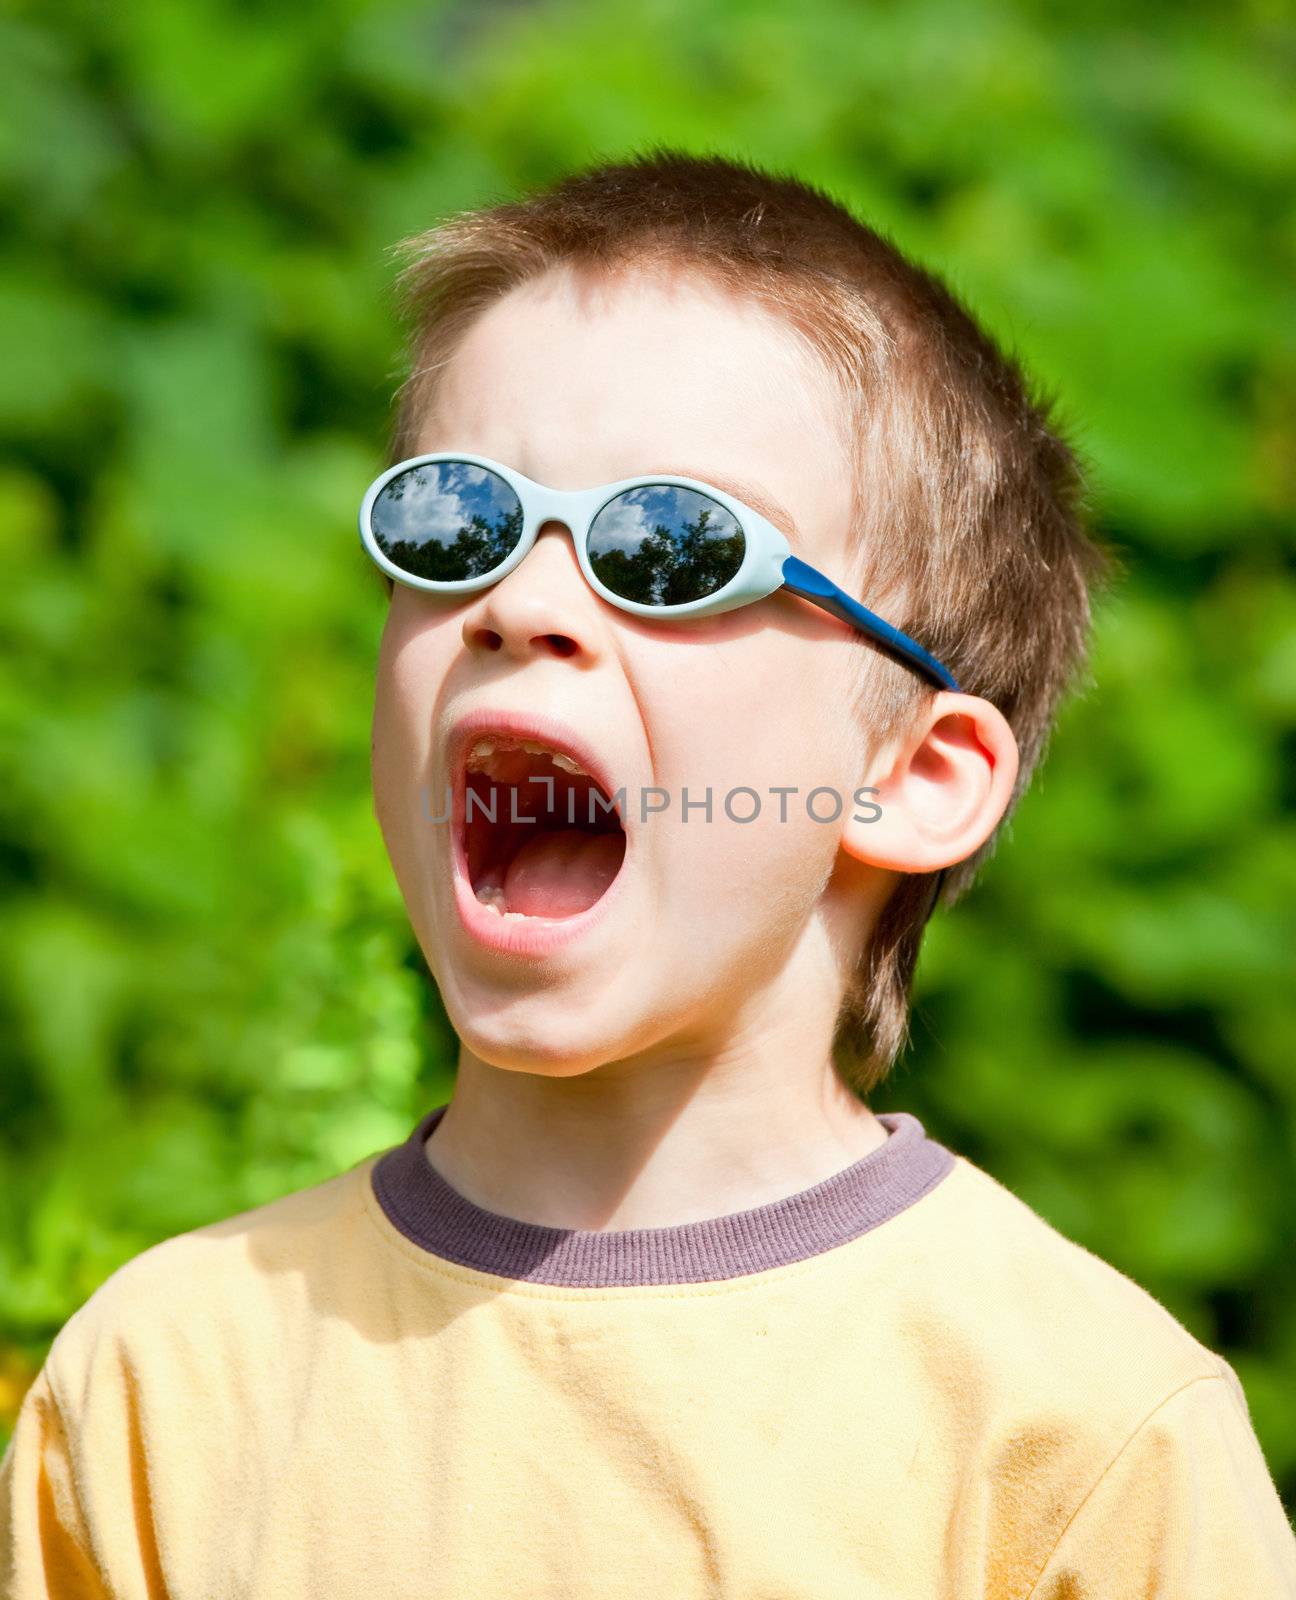 Young boy wearing sunglasses open-mouthed with surprise